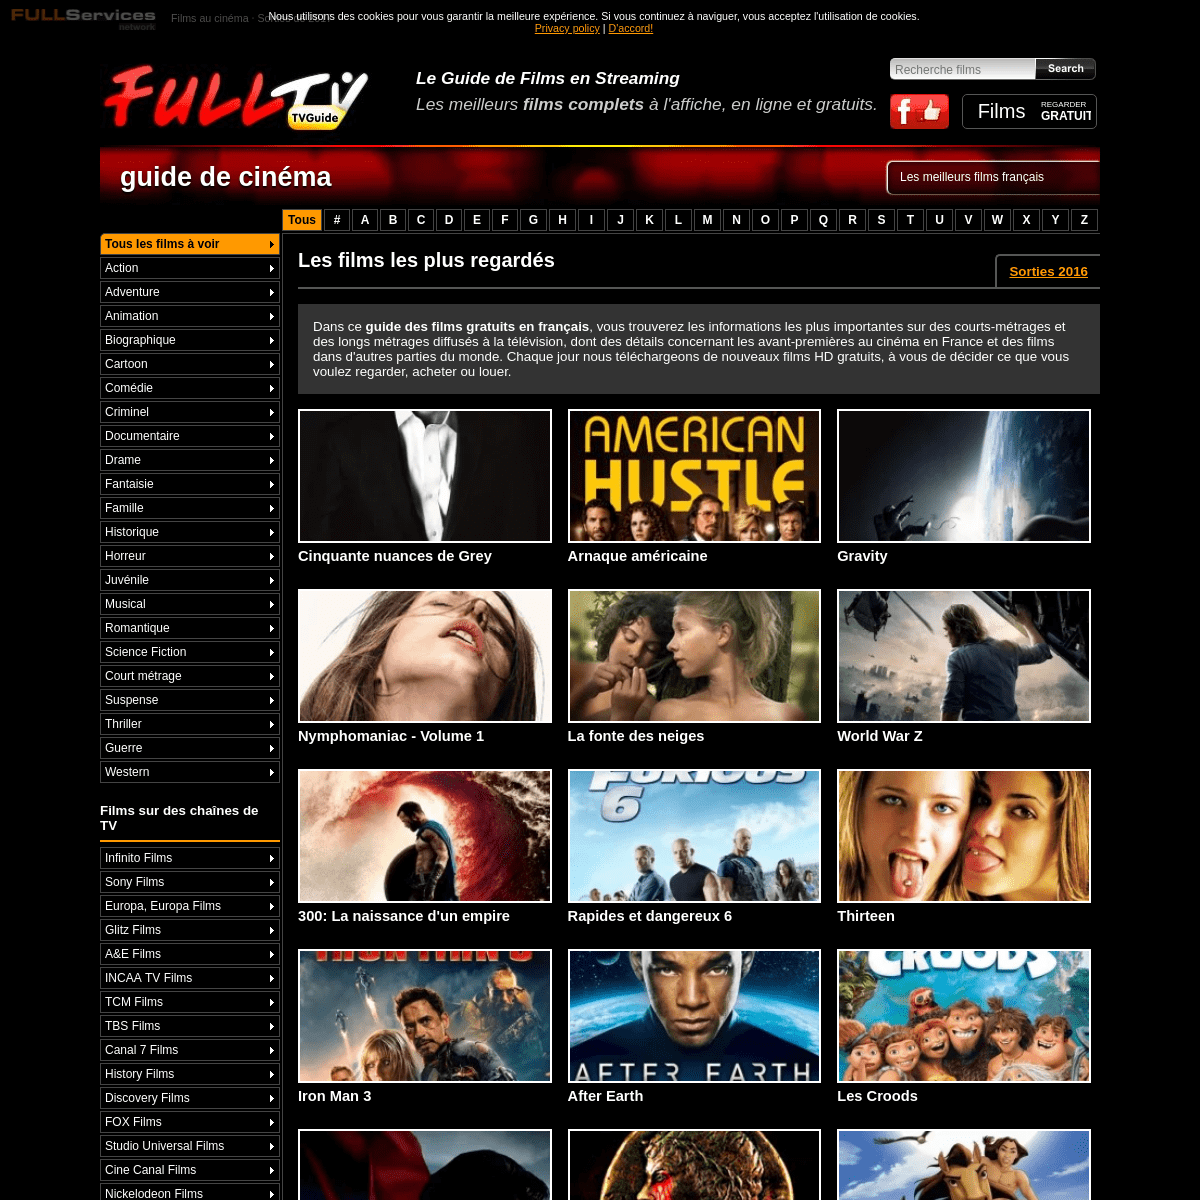 A complete backup of frenchtvmovies.com